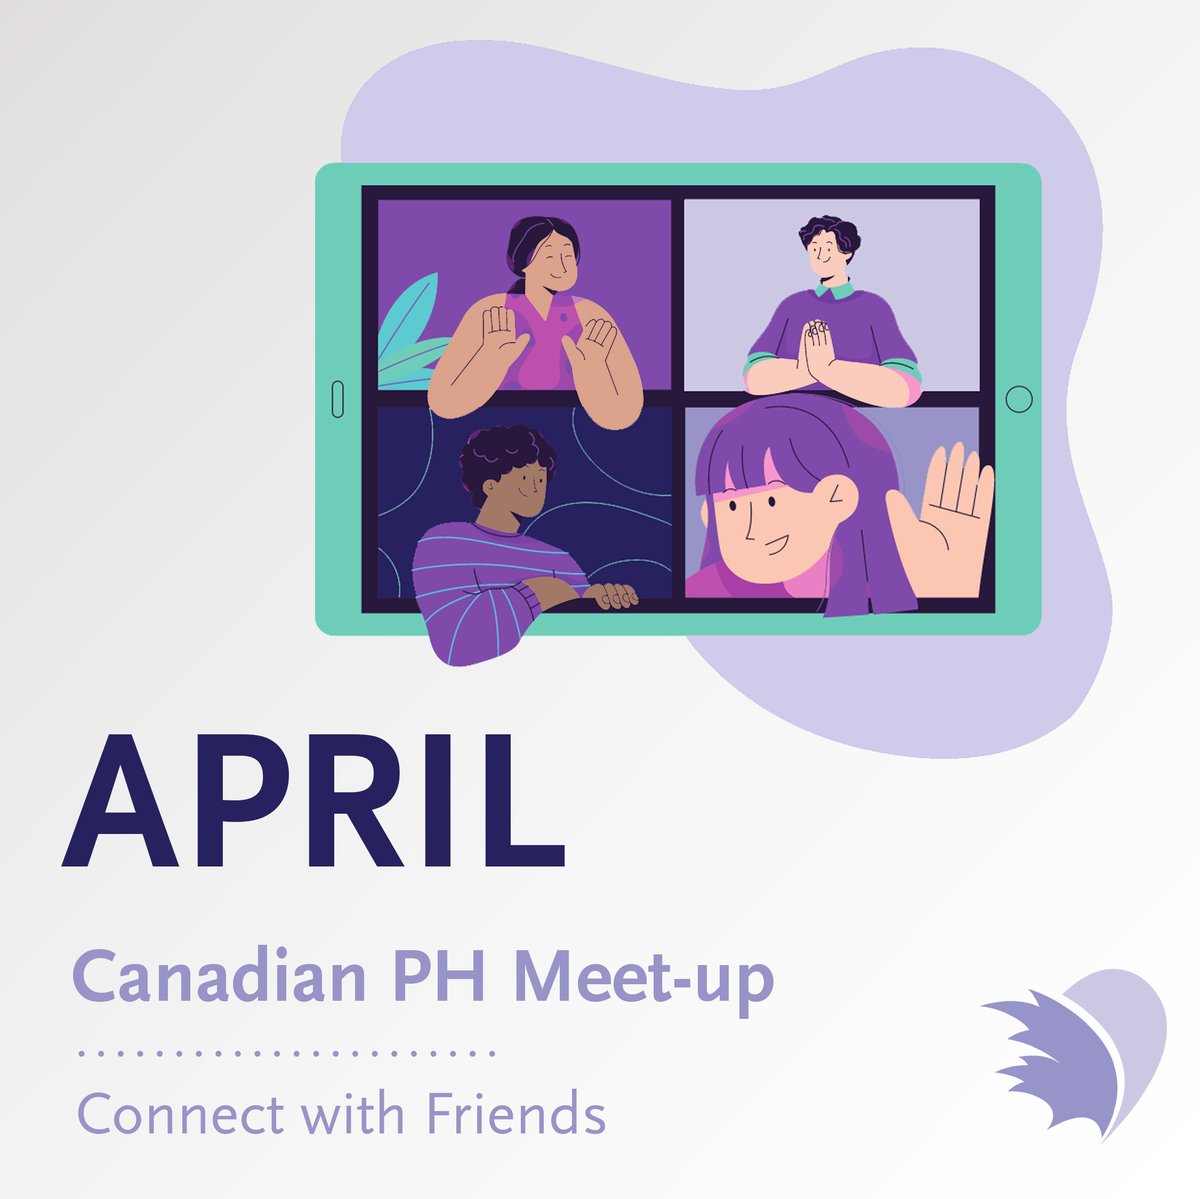 Canadian PH Meet-up 💜 Looking for an opportunity to meet other #PH patients and caregivers from across Canada? Drop-in to one of our #PHMeetUp Zoom lines this month to connect with others and get answers to your questions! Register now at: ow.ly/z04G50RaYHL